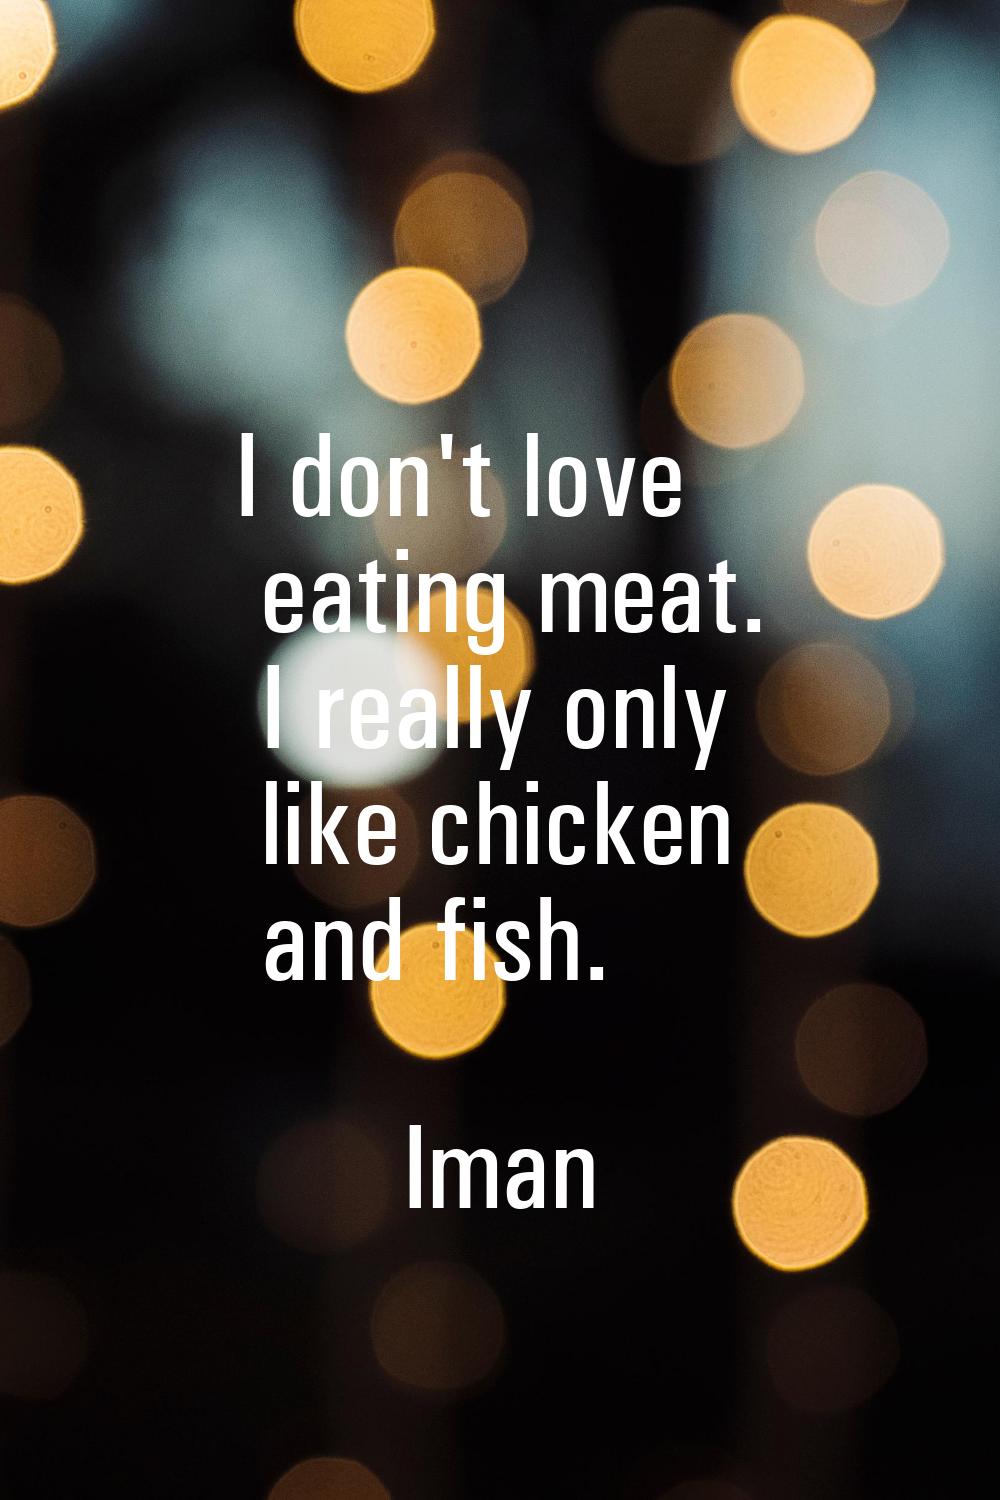 I don't love eating meat. I really only like chicken and fish.